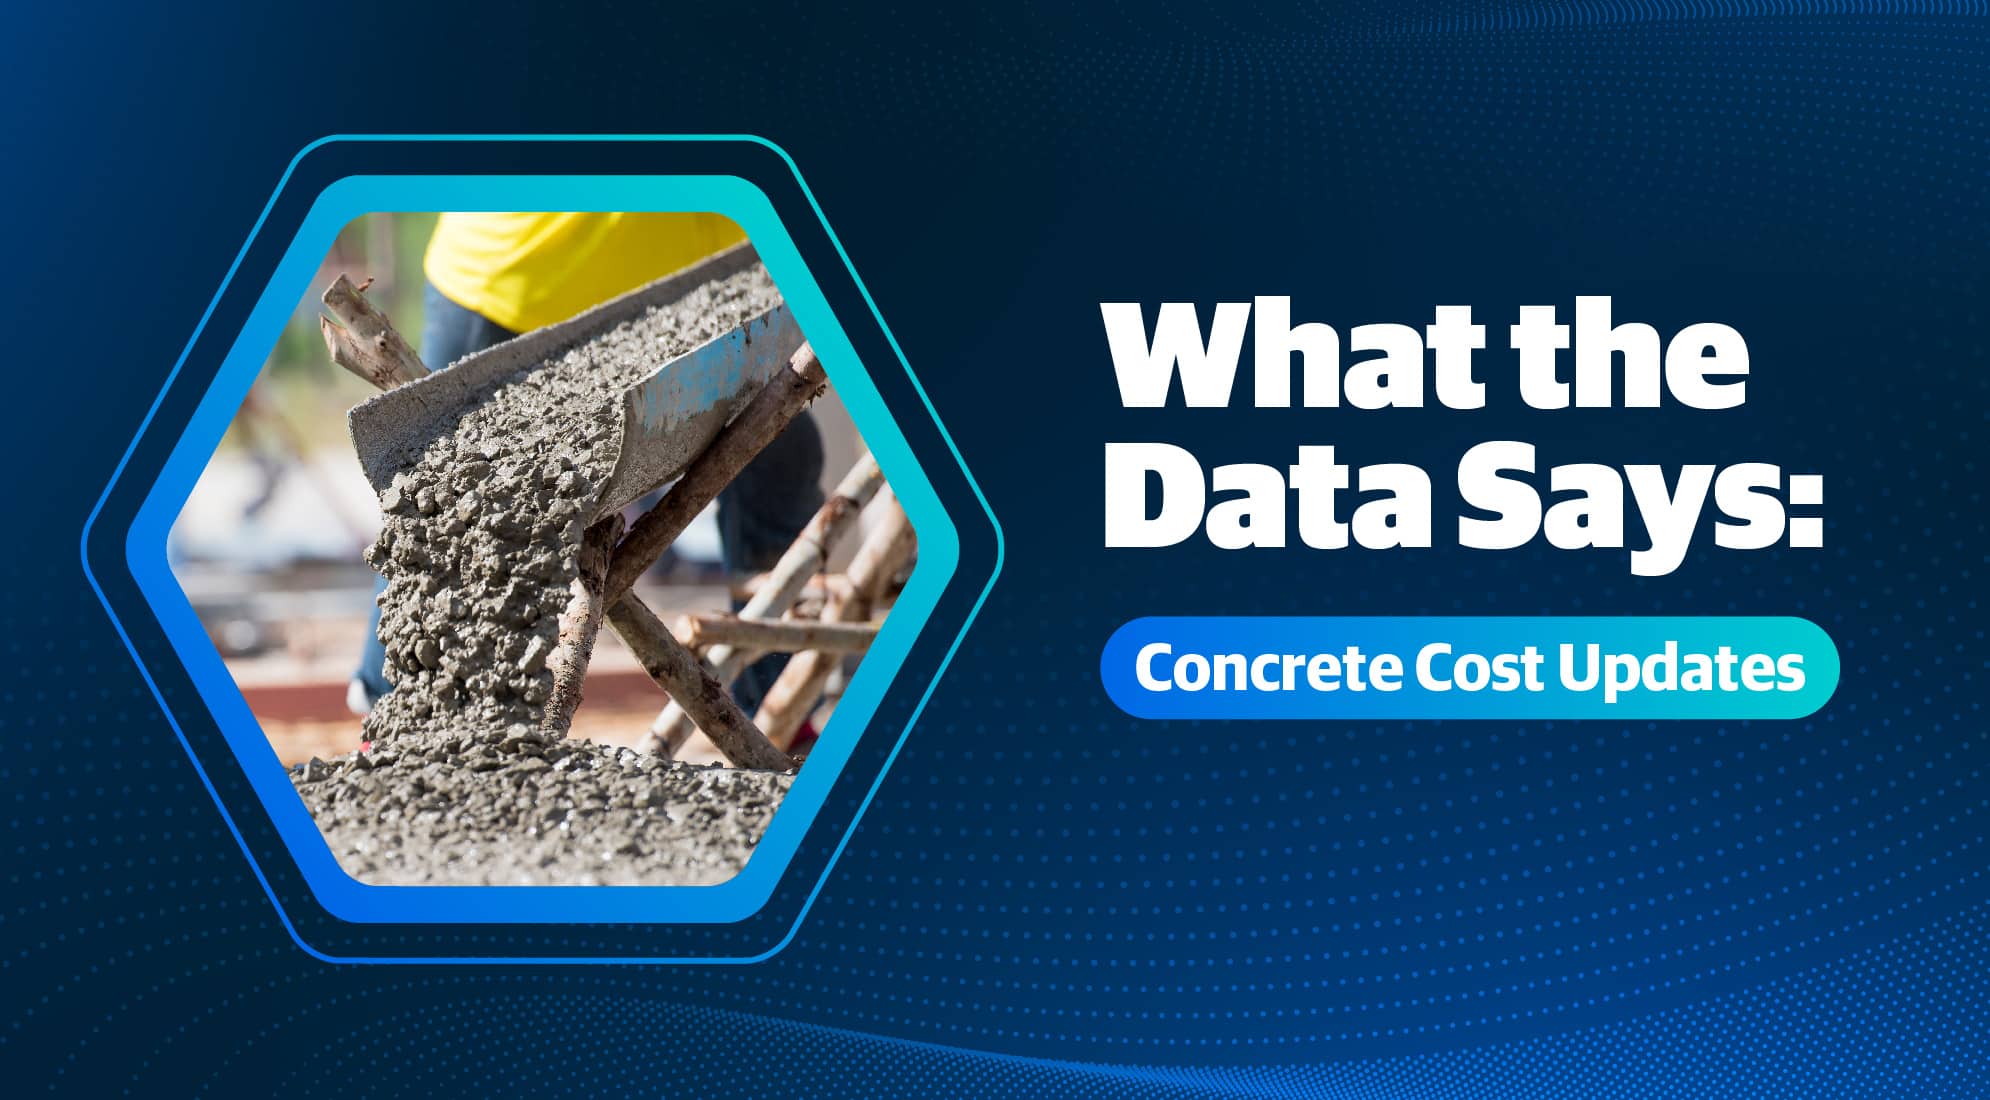 What the Data Says: Concrete Cost Updates